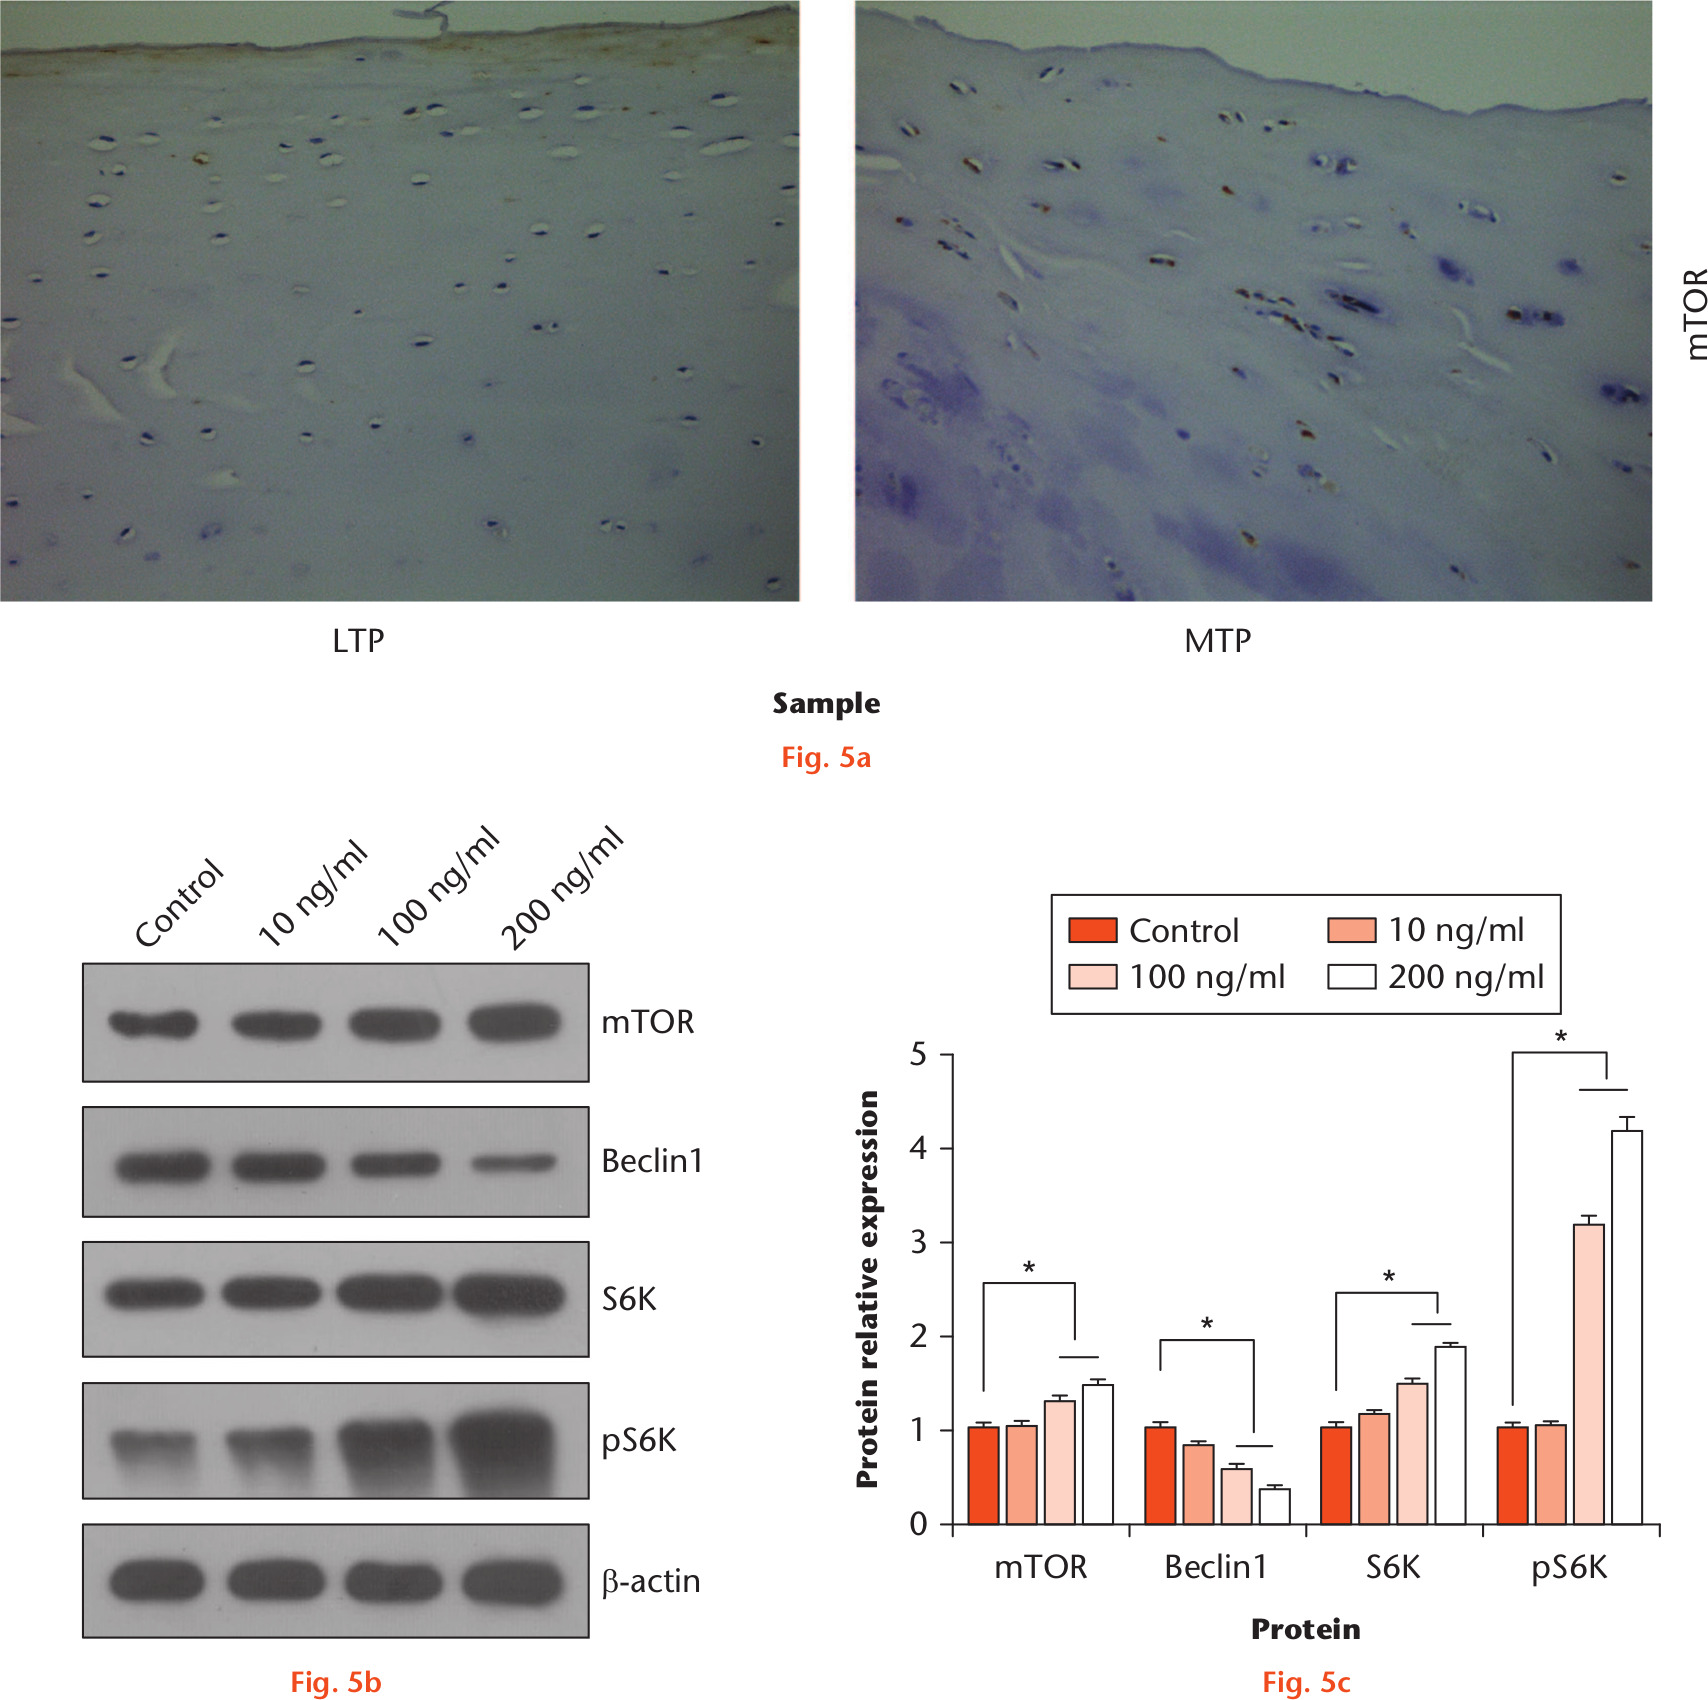 Fig. 5 
            High-dose leptin induces senescence and inhibits autophagy by activating the mammalian target of rapamycin (mTOR) pathway. a) Expression and distribution of mTOR in medial tibial plateau (MTP) and lateral tibial plateau (LTP) cartilage areas were detected. b) In chondrocytes treated by high-dose leptin, increased expression of mTOR, S6 kinase (S6K), pS6K, and Beclin1 was detected. c) Chart showing statistical analyses of expression of mTOR, S6K, and pS6K. Relative protein abundance of each blot was normalized to the grey value of β-actin. Error bars indicate the mean and standard deviation. *p < 0.05 was considered statistically significant.
          